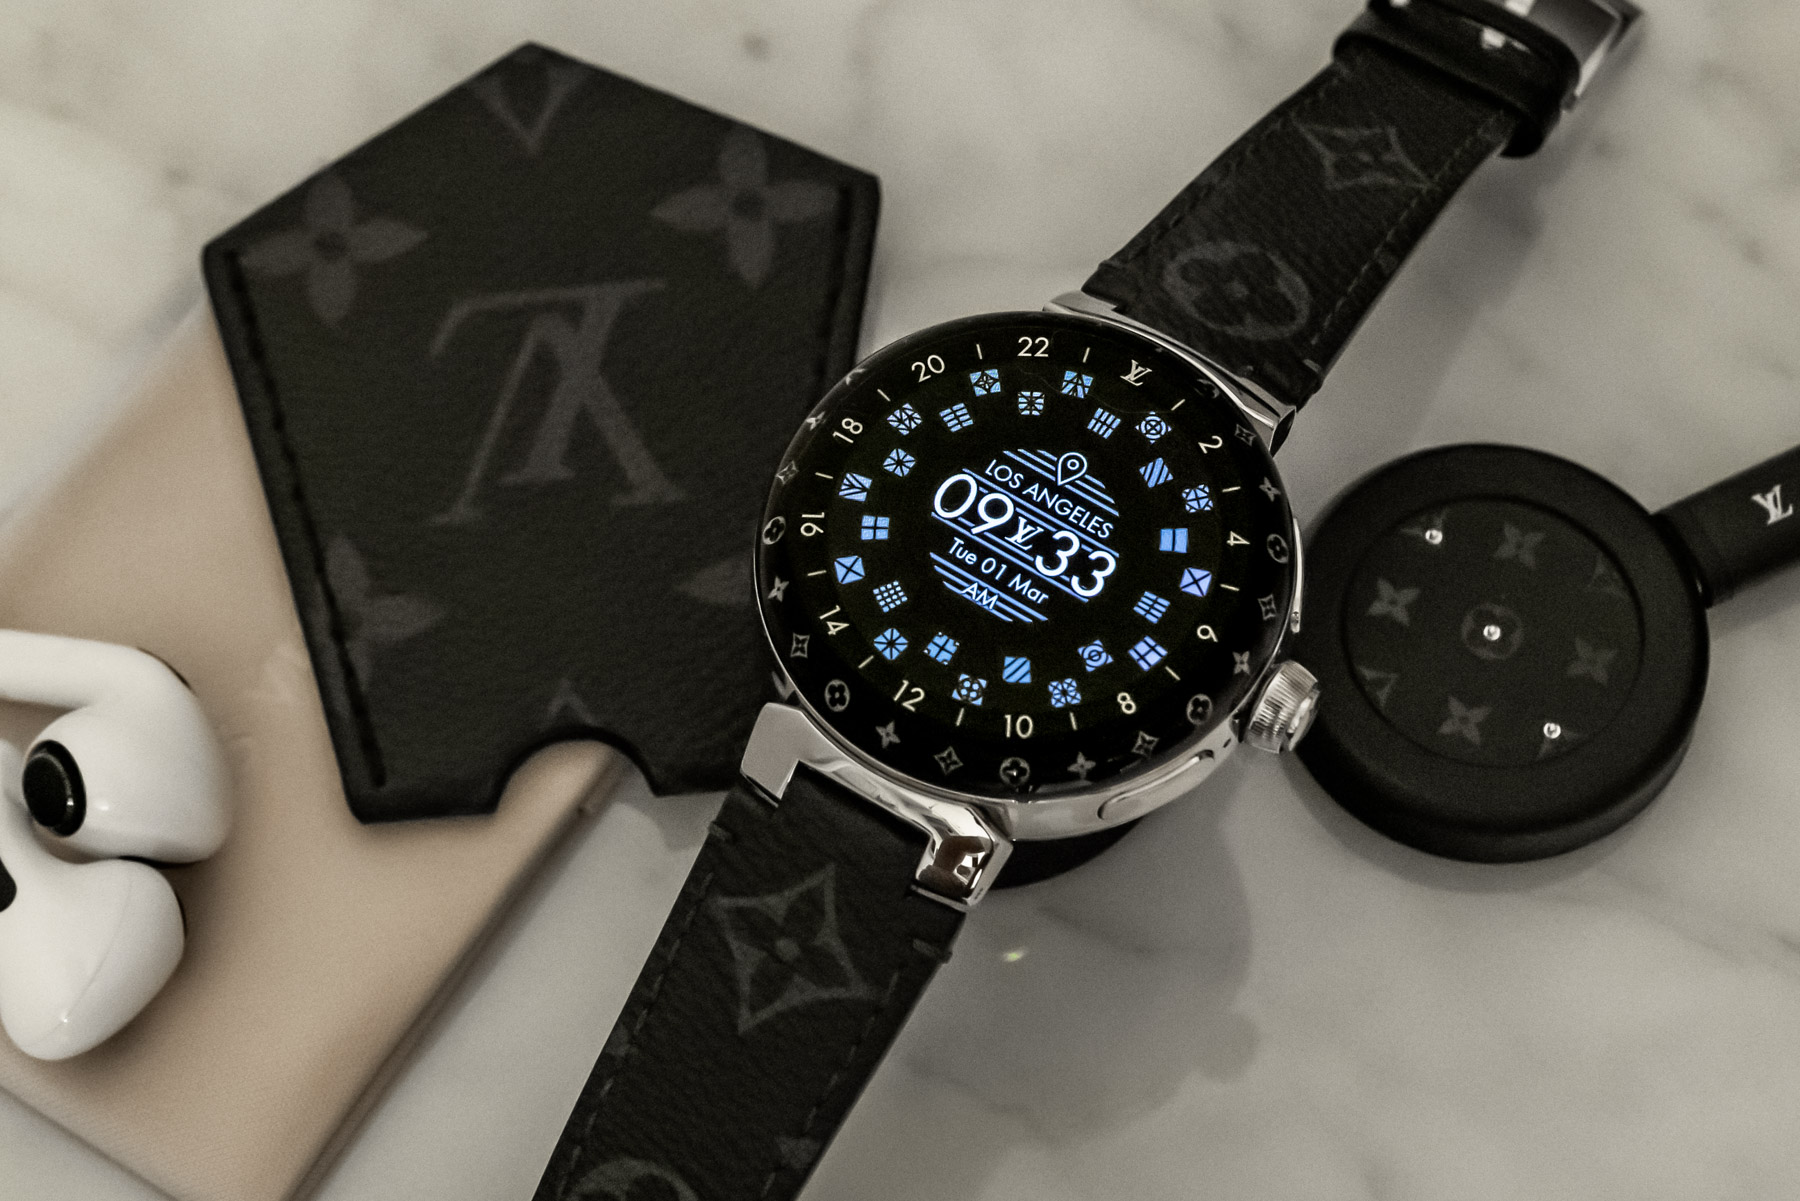 Hands-On With The Louis Vuitton Tambour Horizon Light Up Luxury